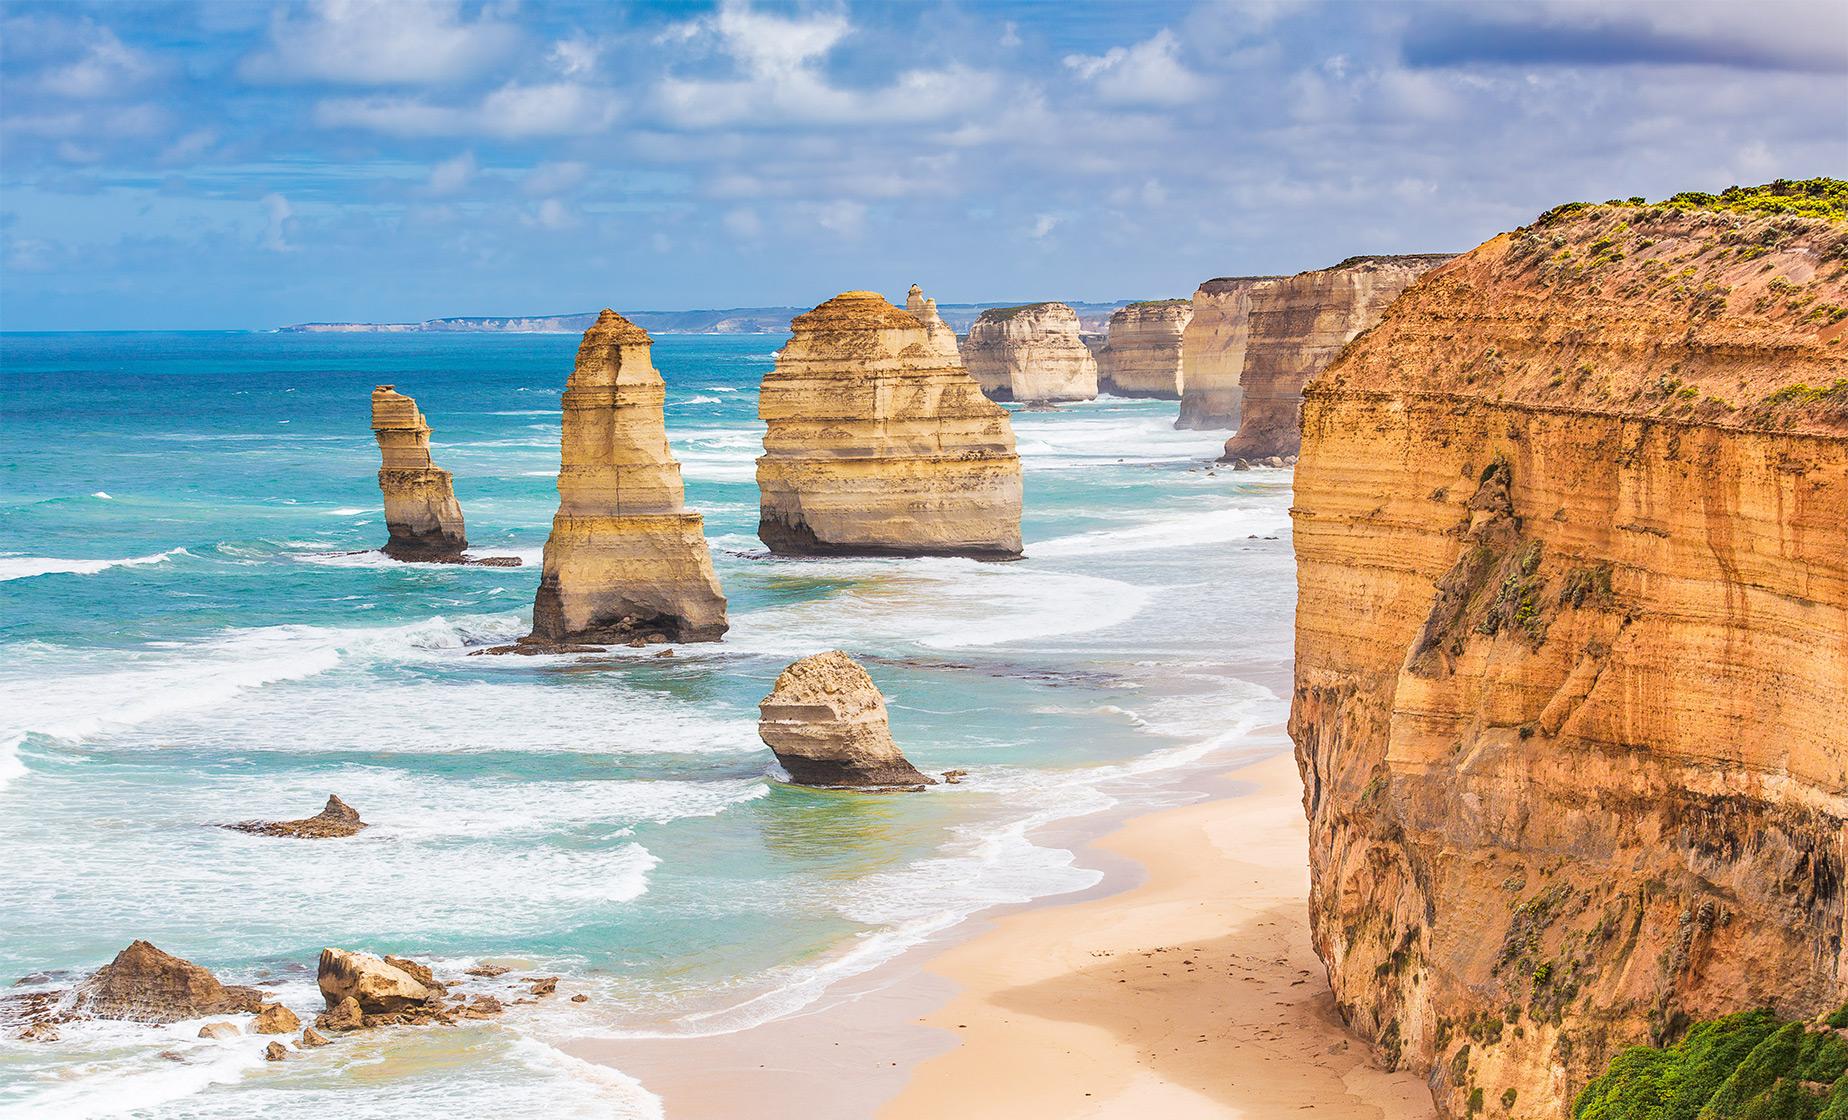 Exclusive Great Ocean Road Eco Tour from Melbourne (Kennett River, Otway Ranges)